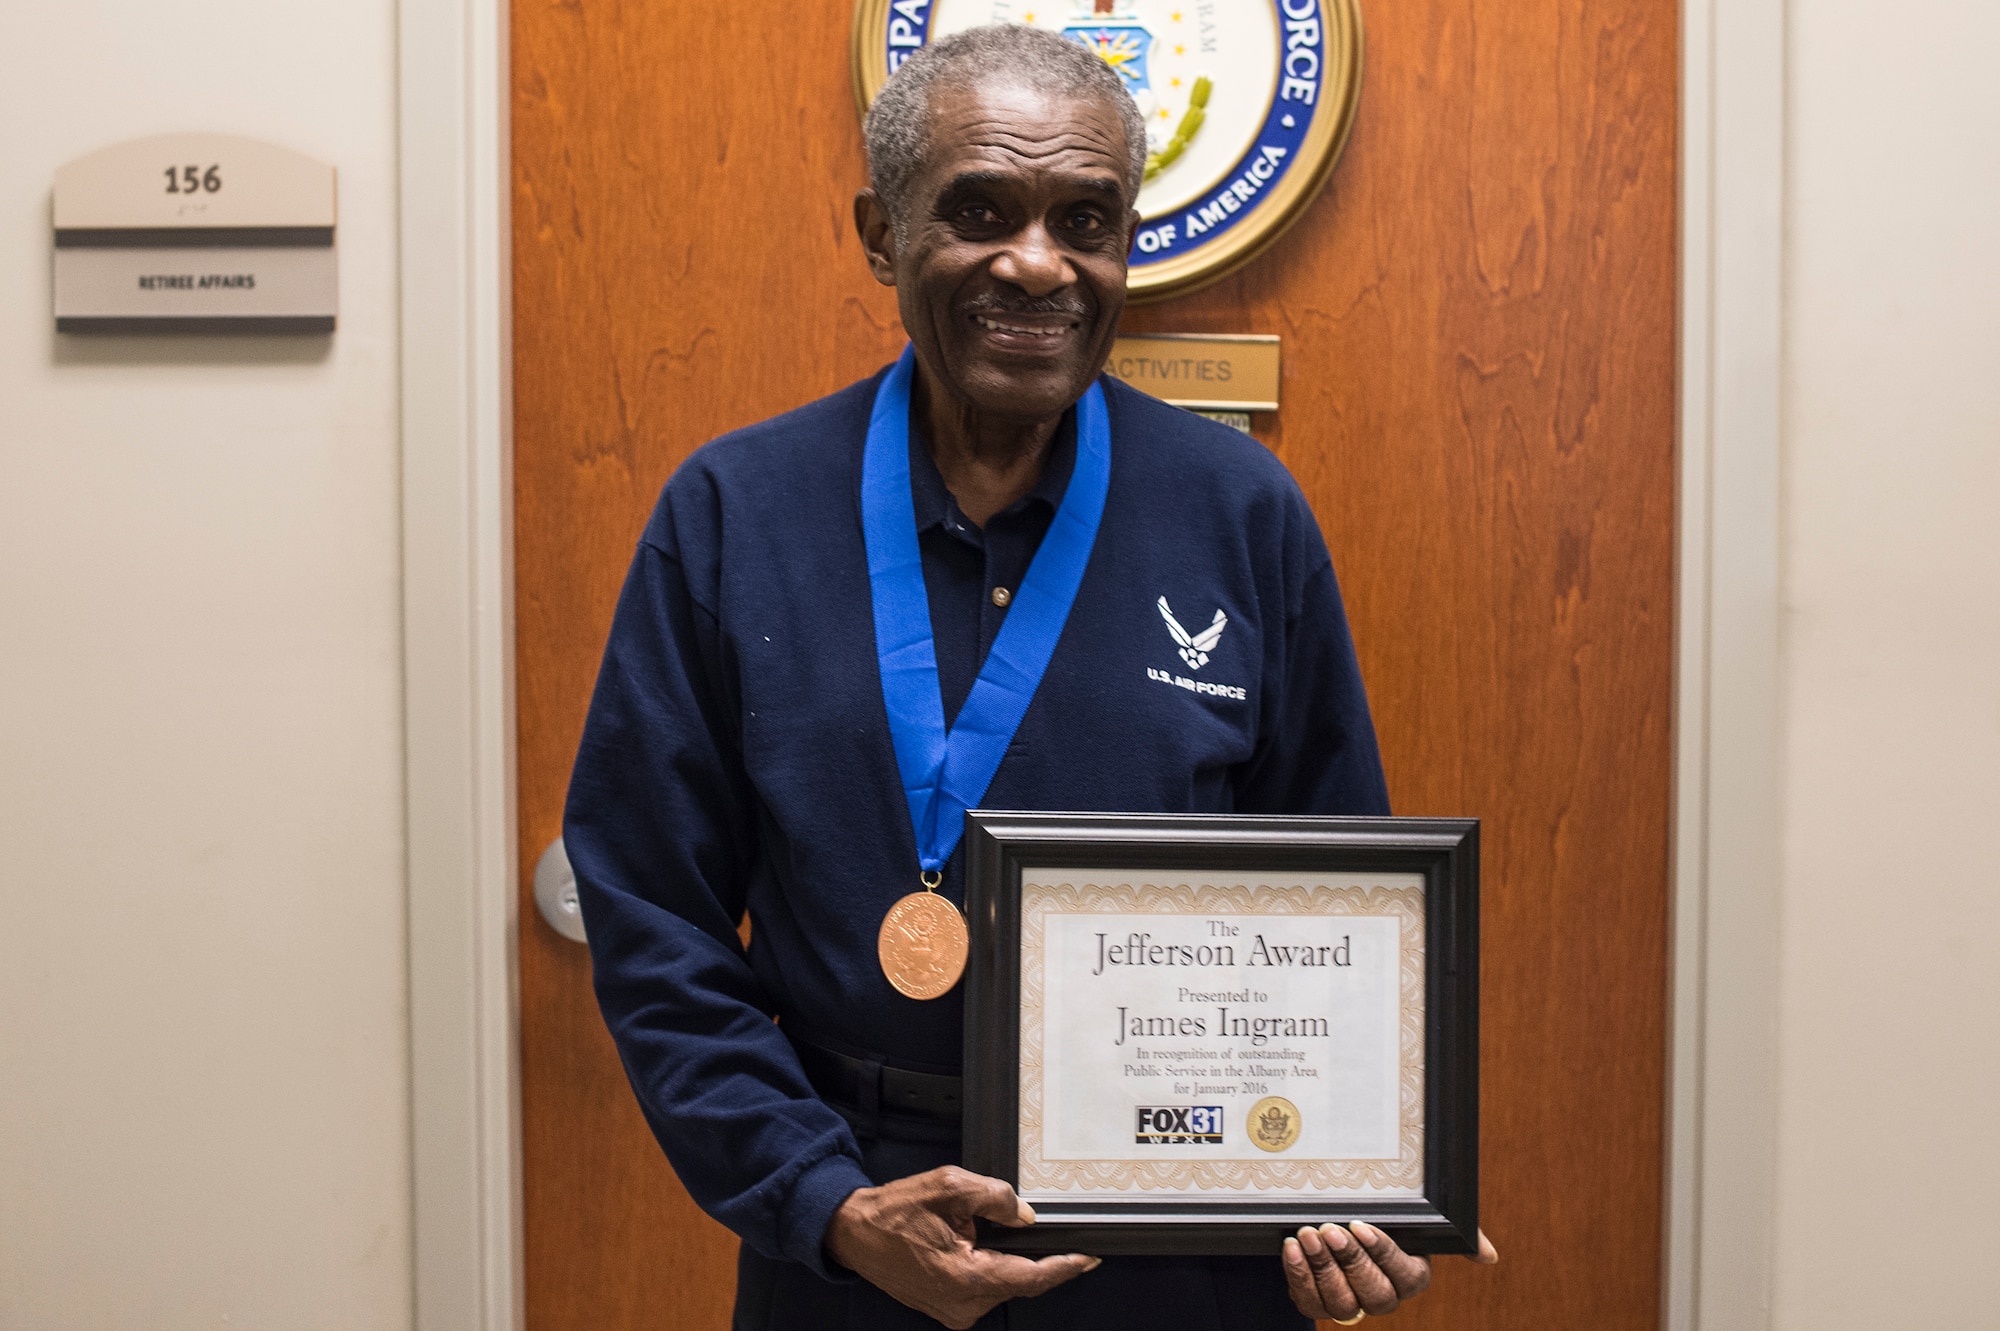 Retired U.S. Air Force Chief Master Sgt. James Ingram, 23d Wing retiree activities office director, poses for a photo with his Jefferson Award medal and certificate, Jan. 12, 2016, at Moody Air Force Base, Ga. Ingram is slated to attend the local awards banquet in February, where he will be formally honored for his achievements along with the 11 other winners. During this banquet, one local winner will be chosen to be recognized on the national level in Washington, D.C. (U.S. Air Force photo by Senior Airman Ceaira Tinsley/Released)